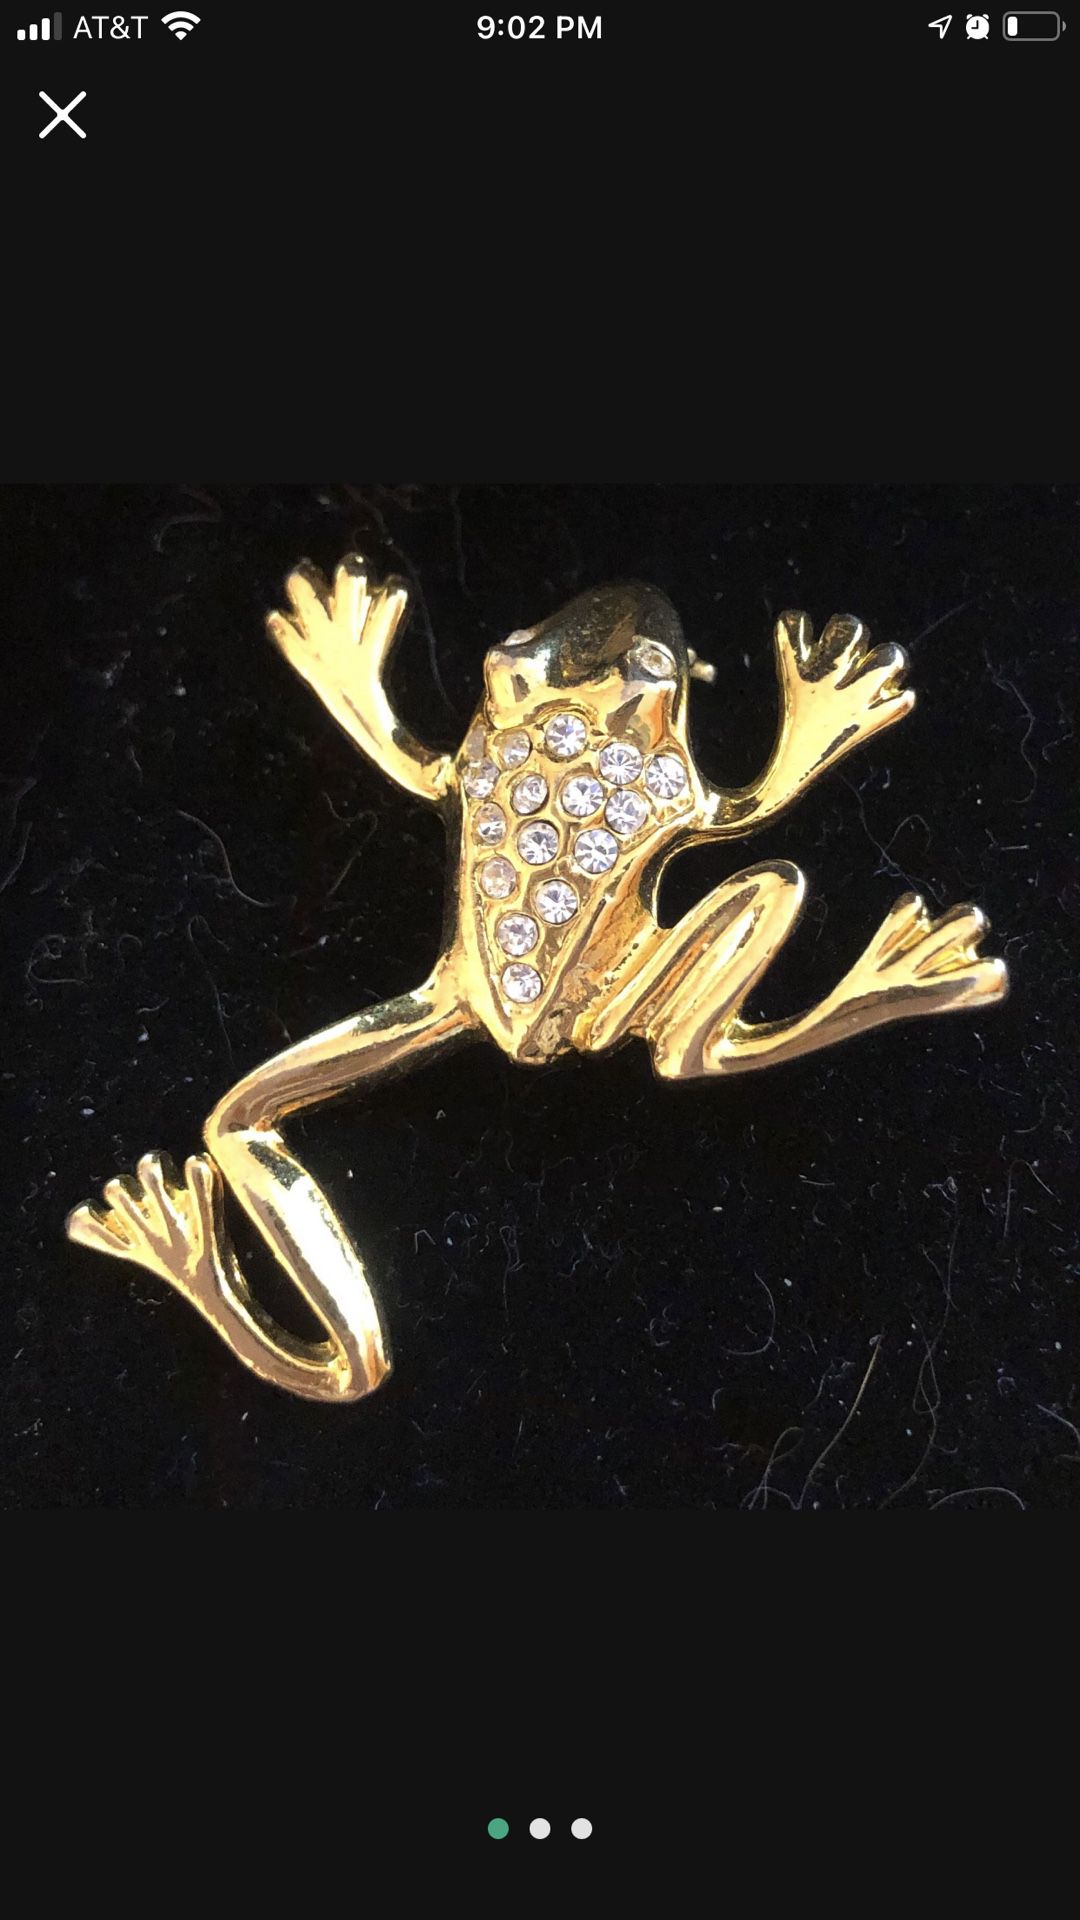 Frog pin brooch 2 1/2 by 2 inches gold tone clear stones